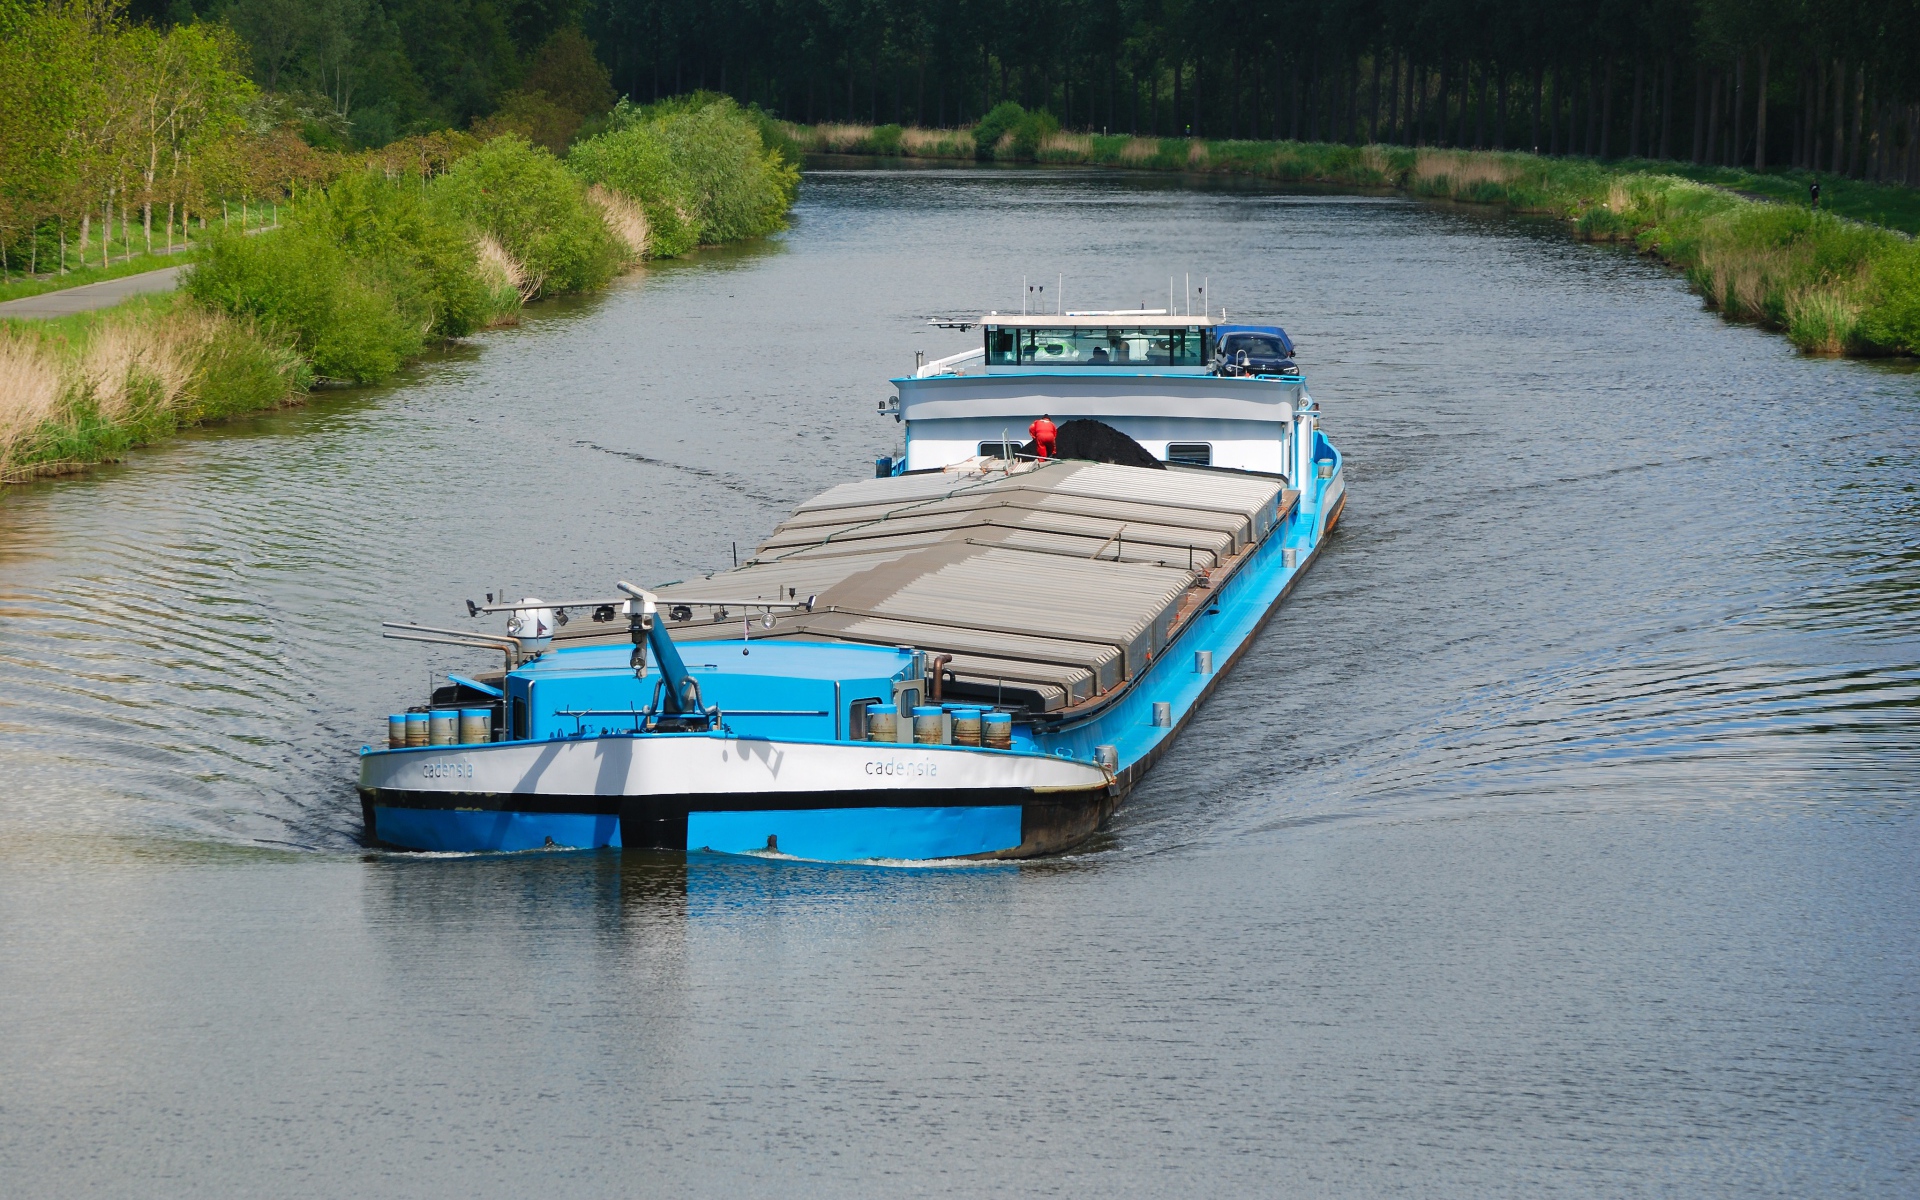 A cargo barge floats on the river